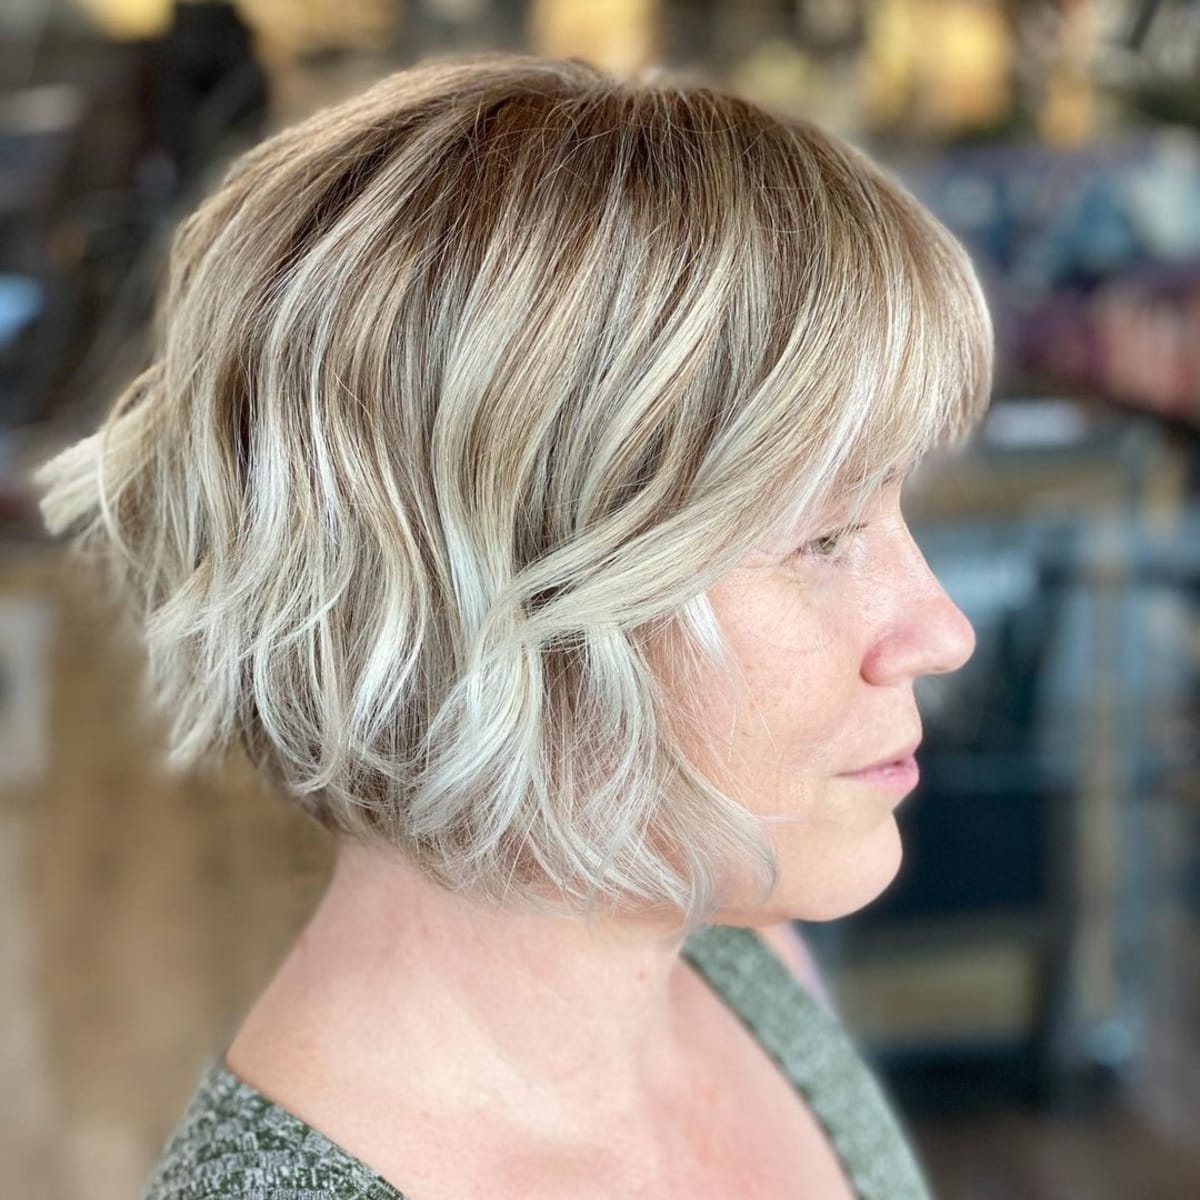 24 Hottest Shaggy Bob Haircuts to Copy - Hairstyles VIP